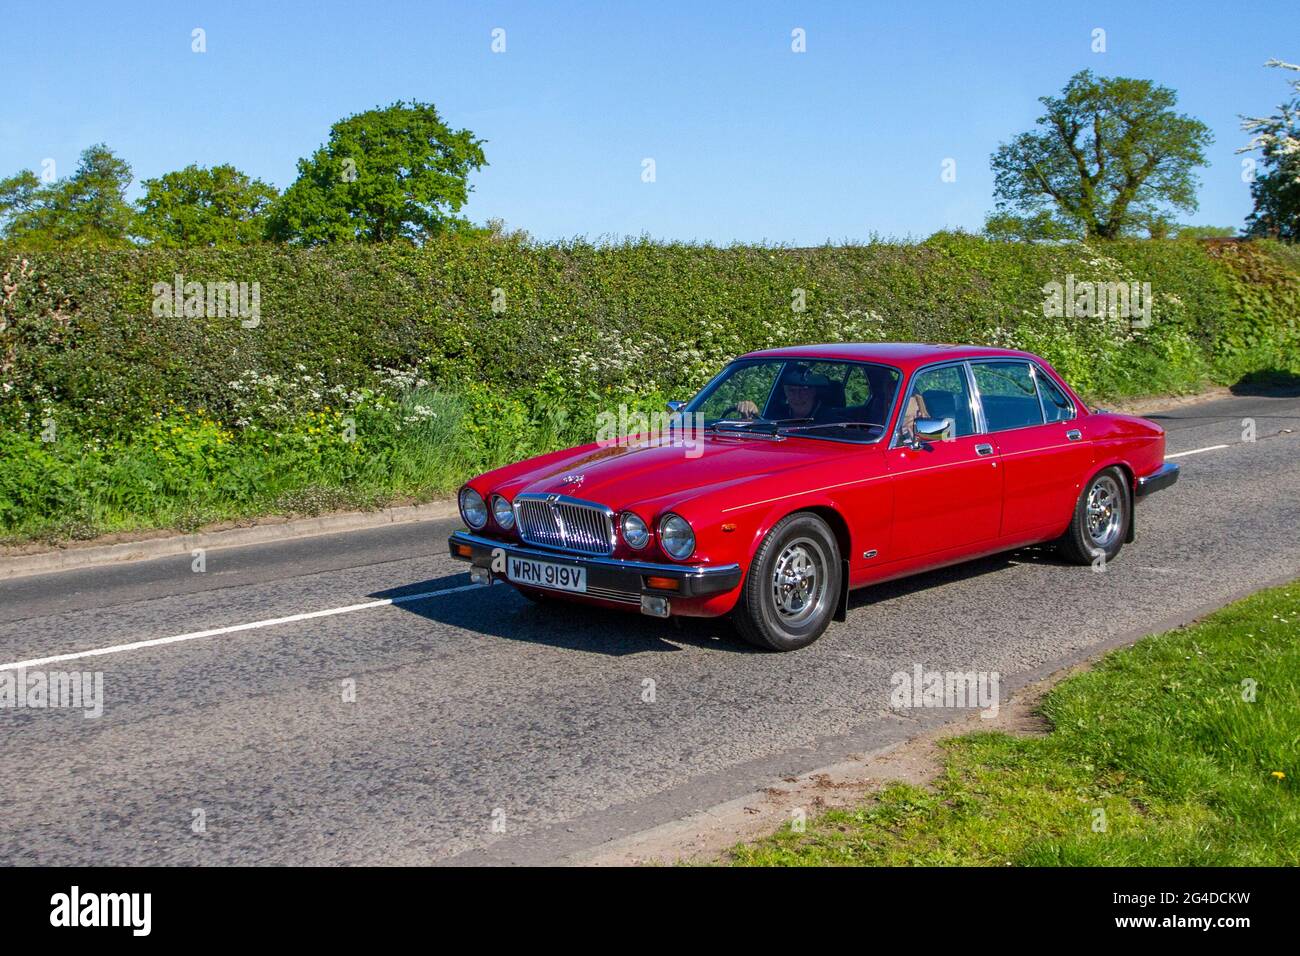 1979 70s red Jaguar XJ 4235cc petrol British 4dr kuxury saloon, en-route to Capesthorne Hall classic May car show, Cheshire, UK Stock Photo